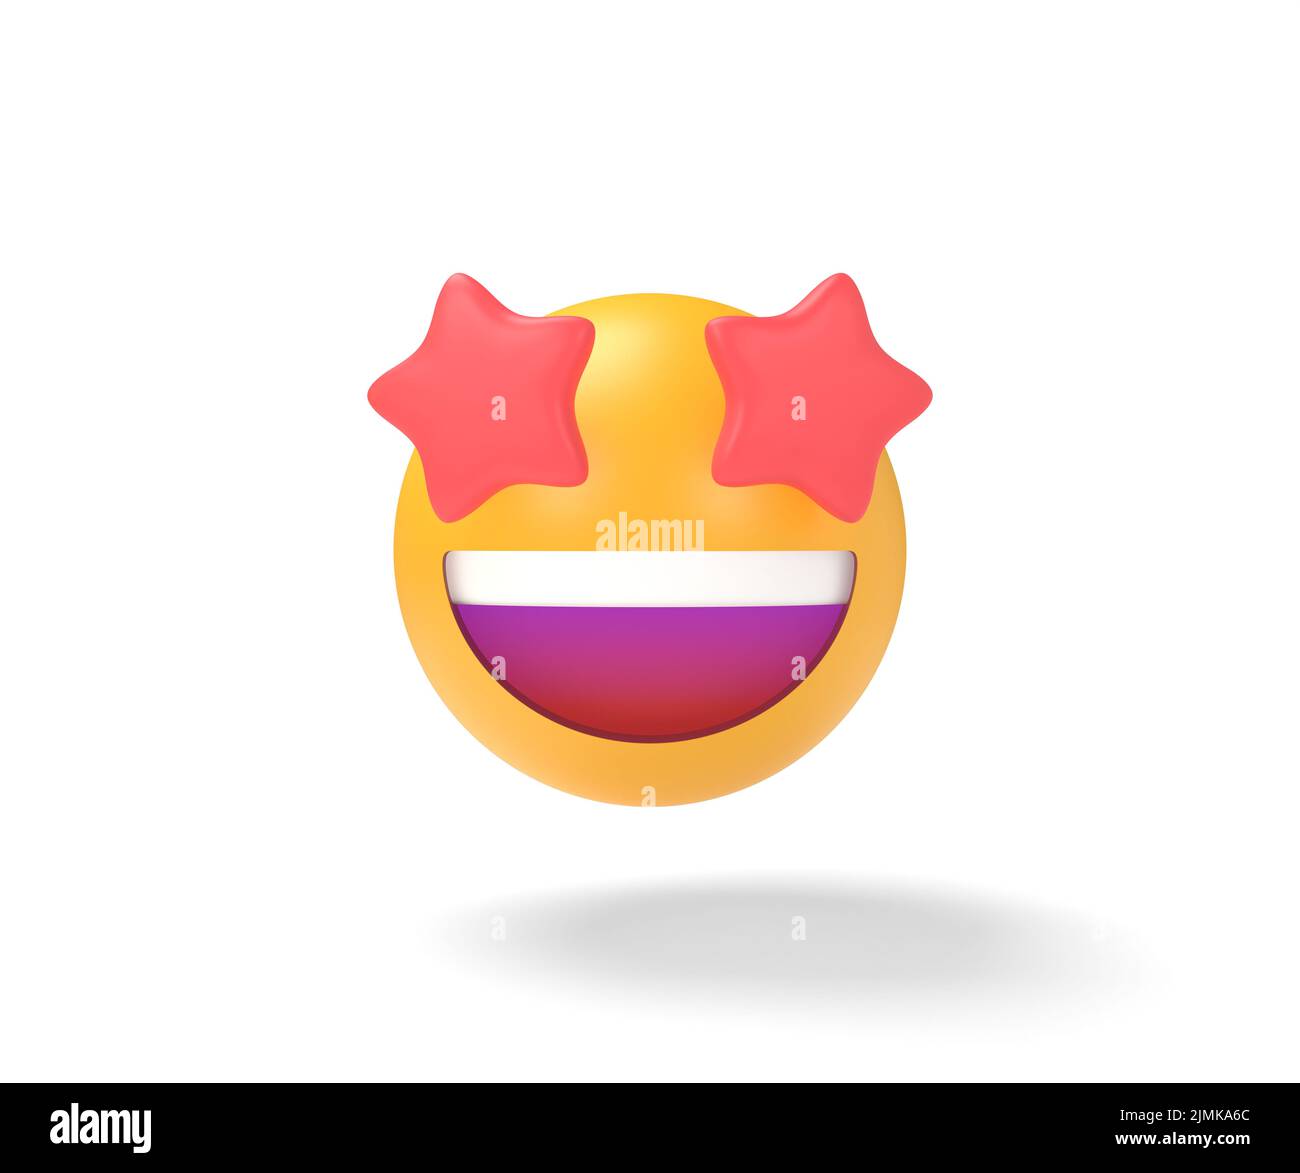 Starry eyed emoji icon. red stars for eyes excited emoticon with open smile 3D illustration Stock Photo